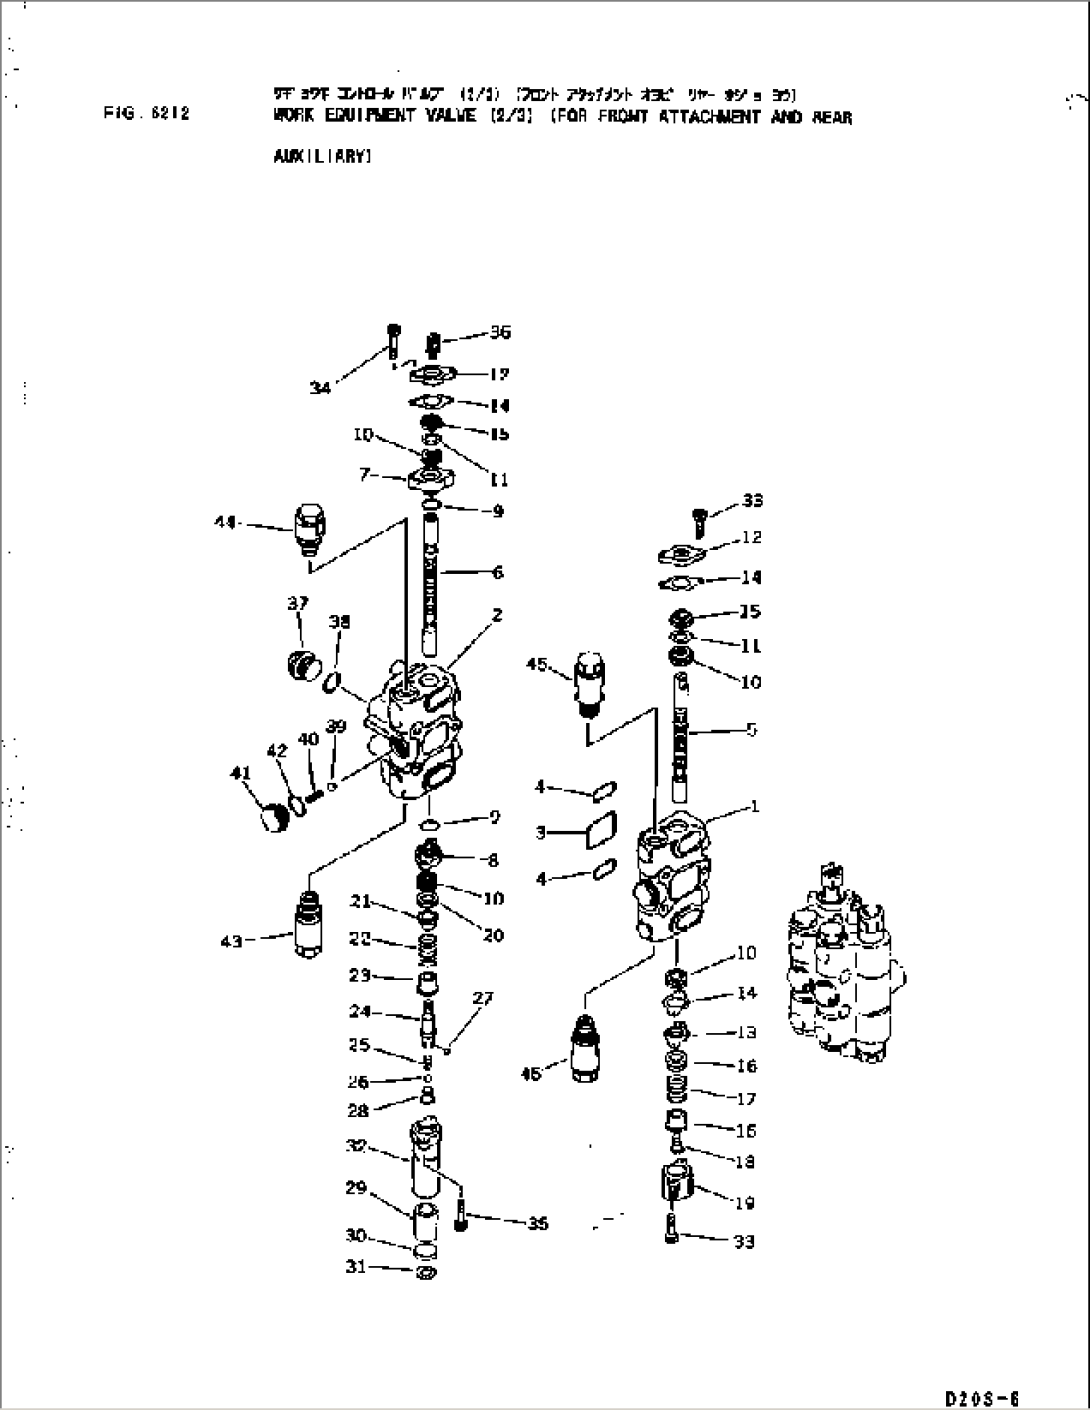 WORK EQUIPMENT VALVE (2/3) (FOR FRONT ATTACHMENT AND REAR AUXILIARY)